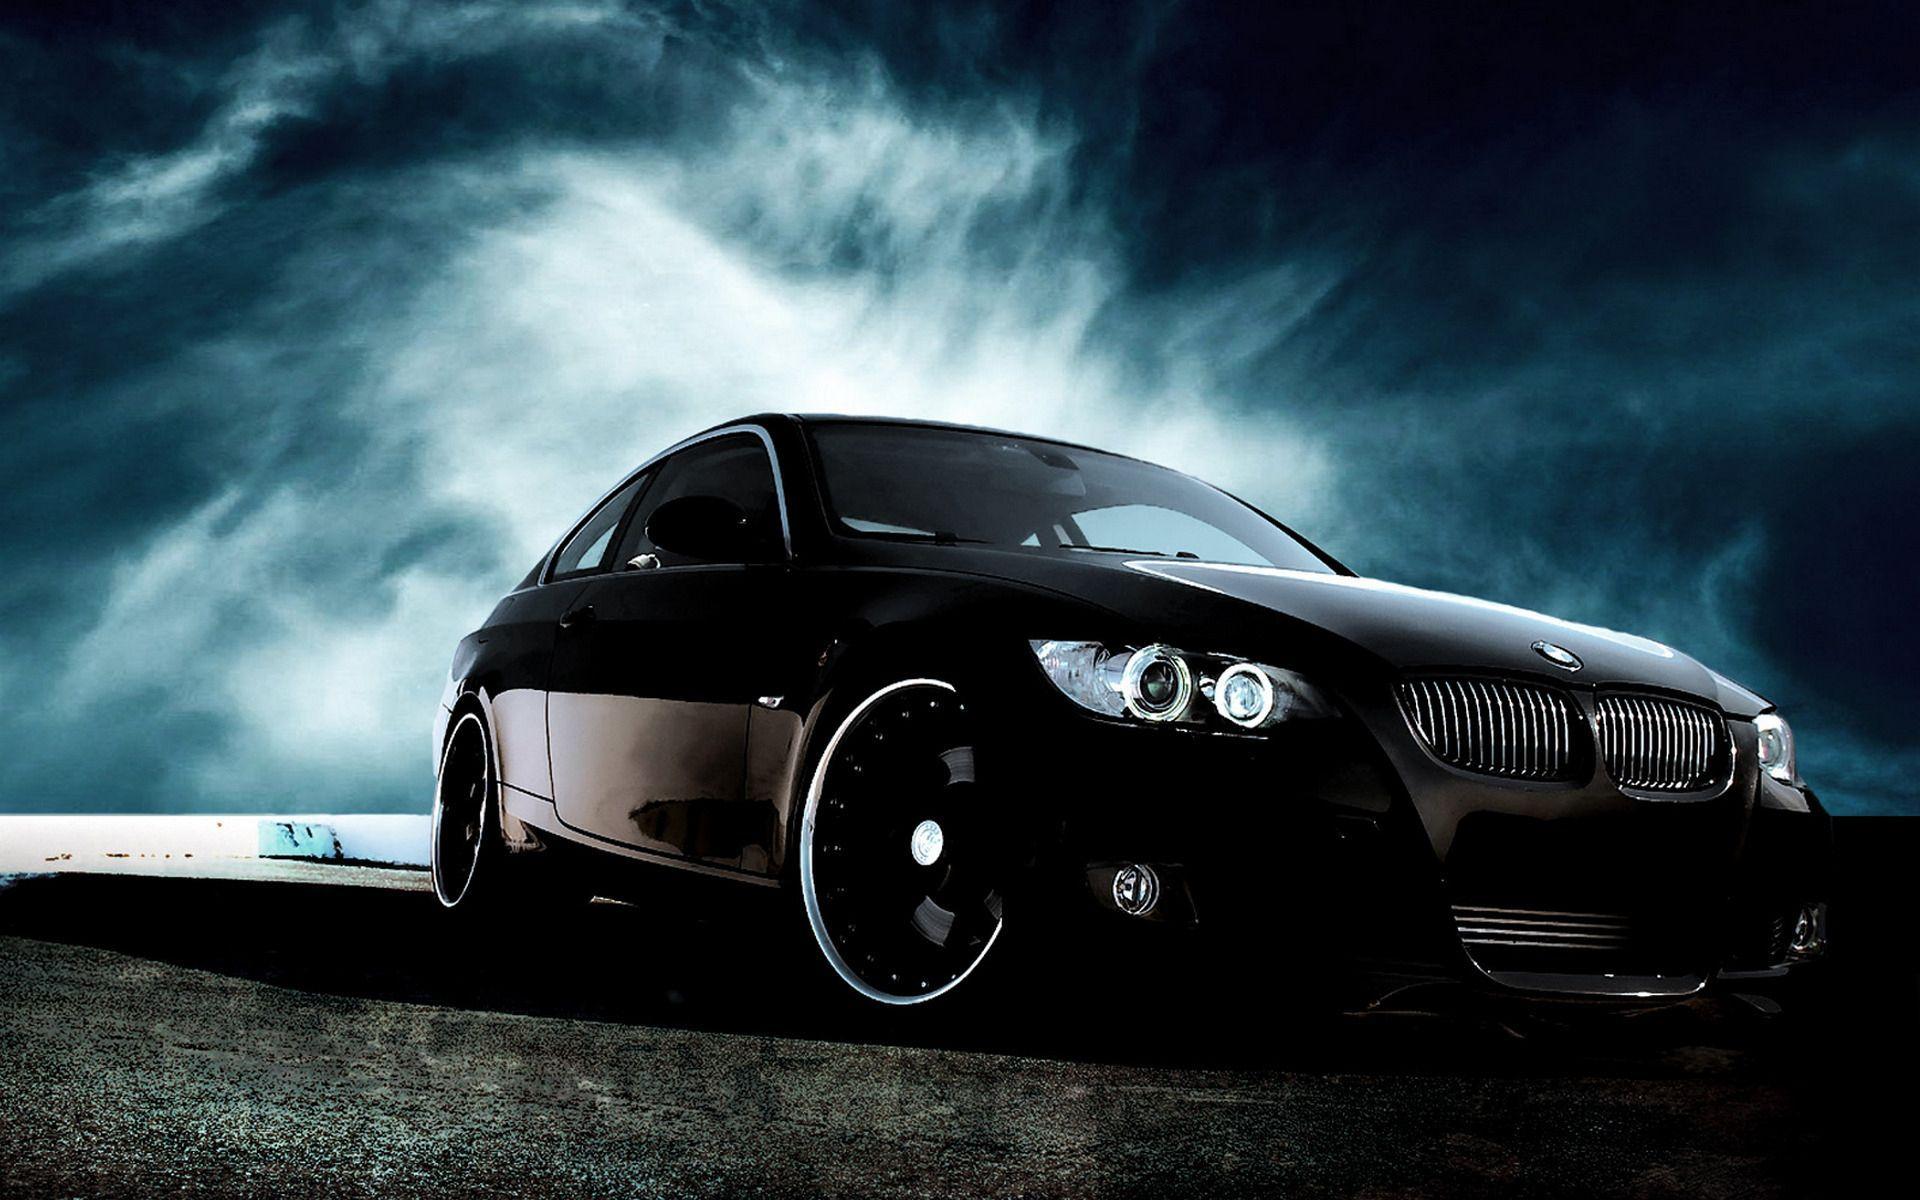 Black BMW Wallpapers - Top Free Black BMW Backgrounds - WallpaperAccess